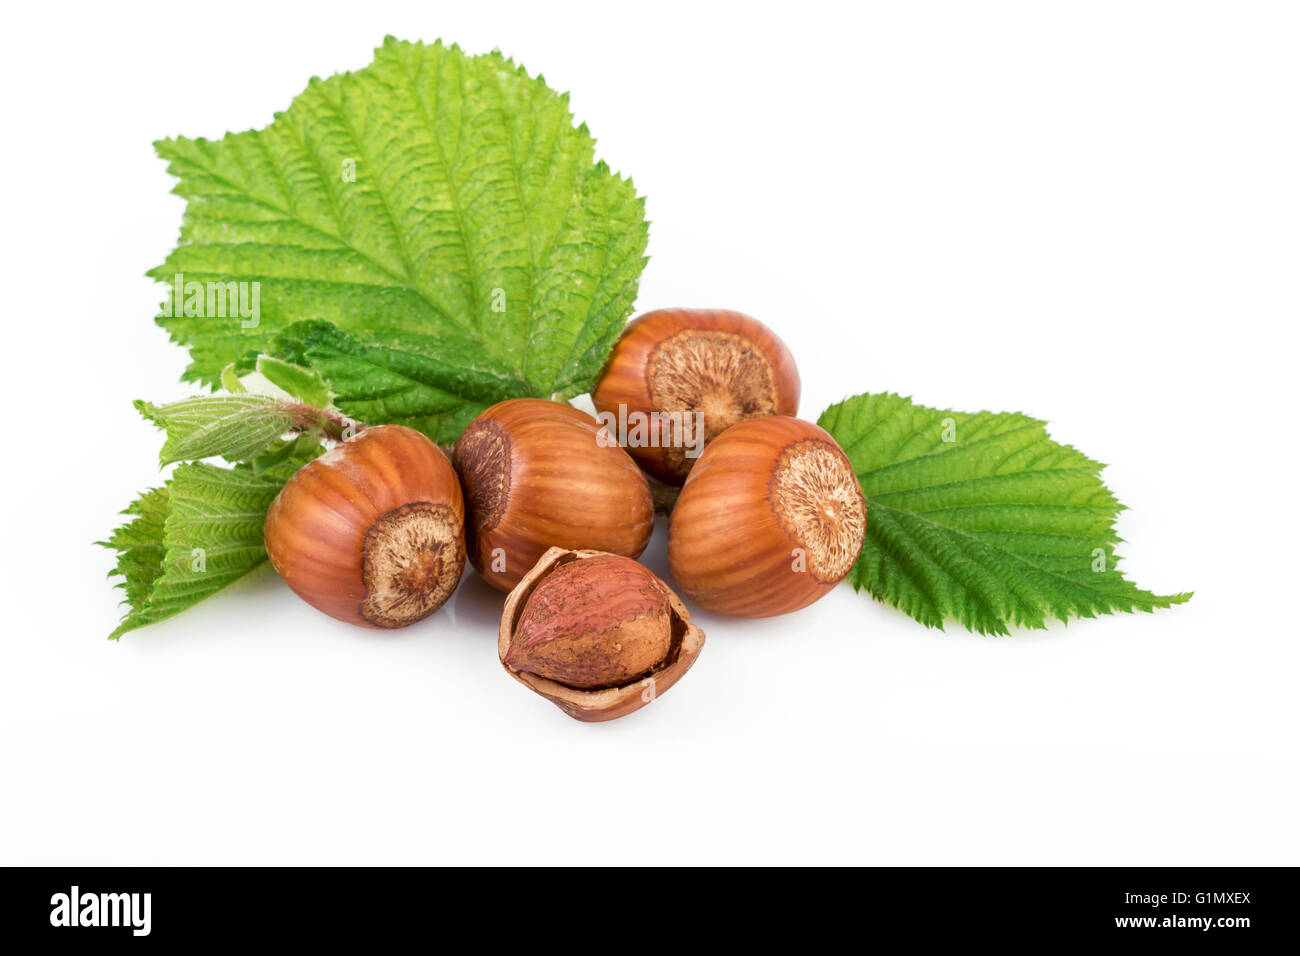 Hazelnut or filbert nuts with leaves on white background Stock Photo